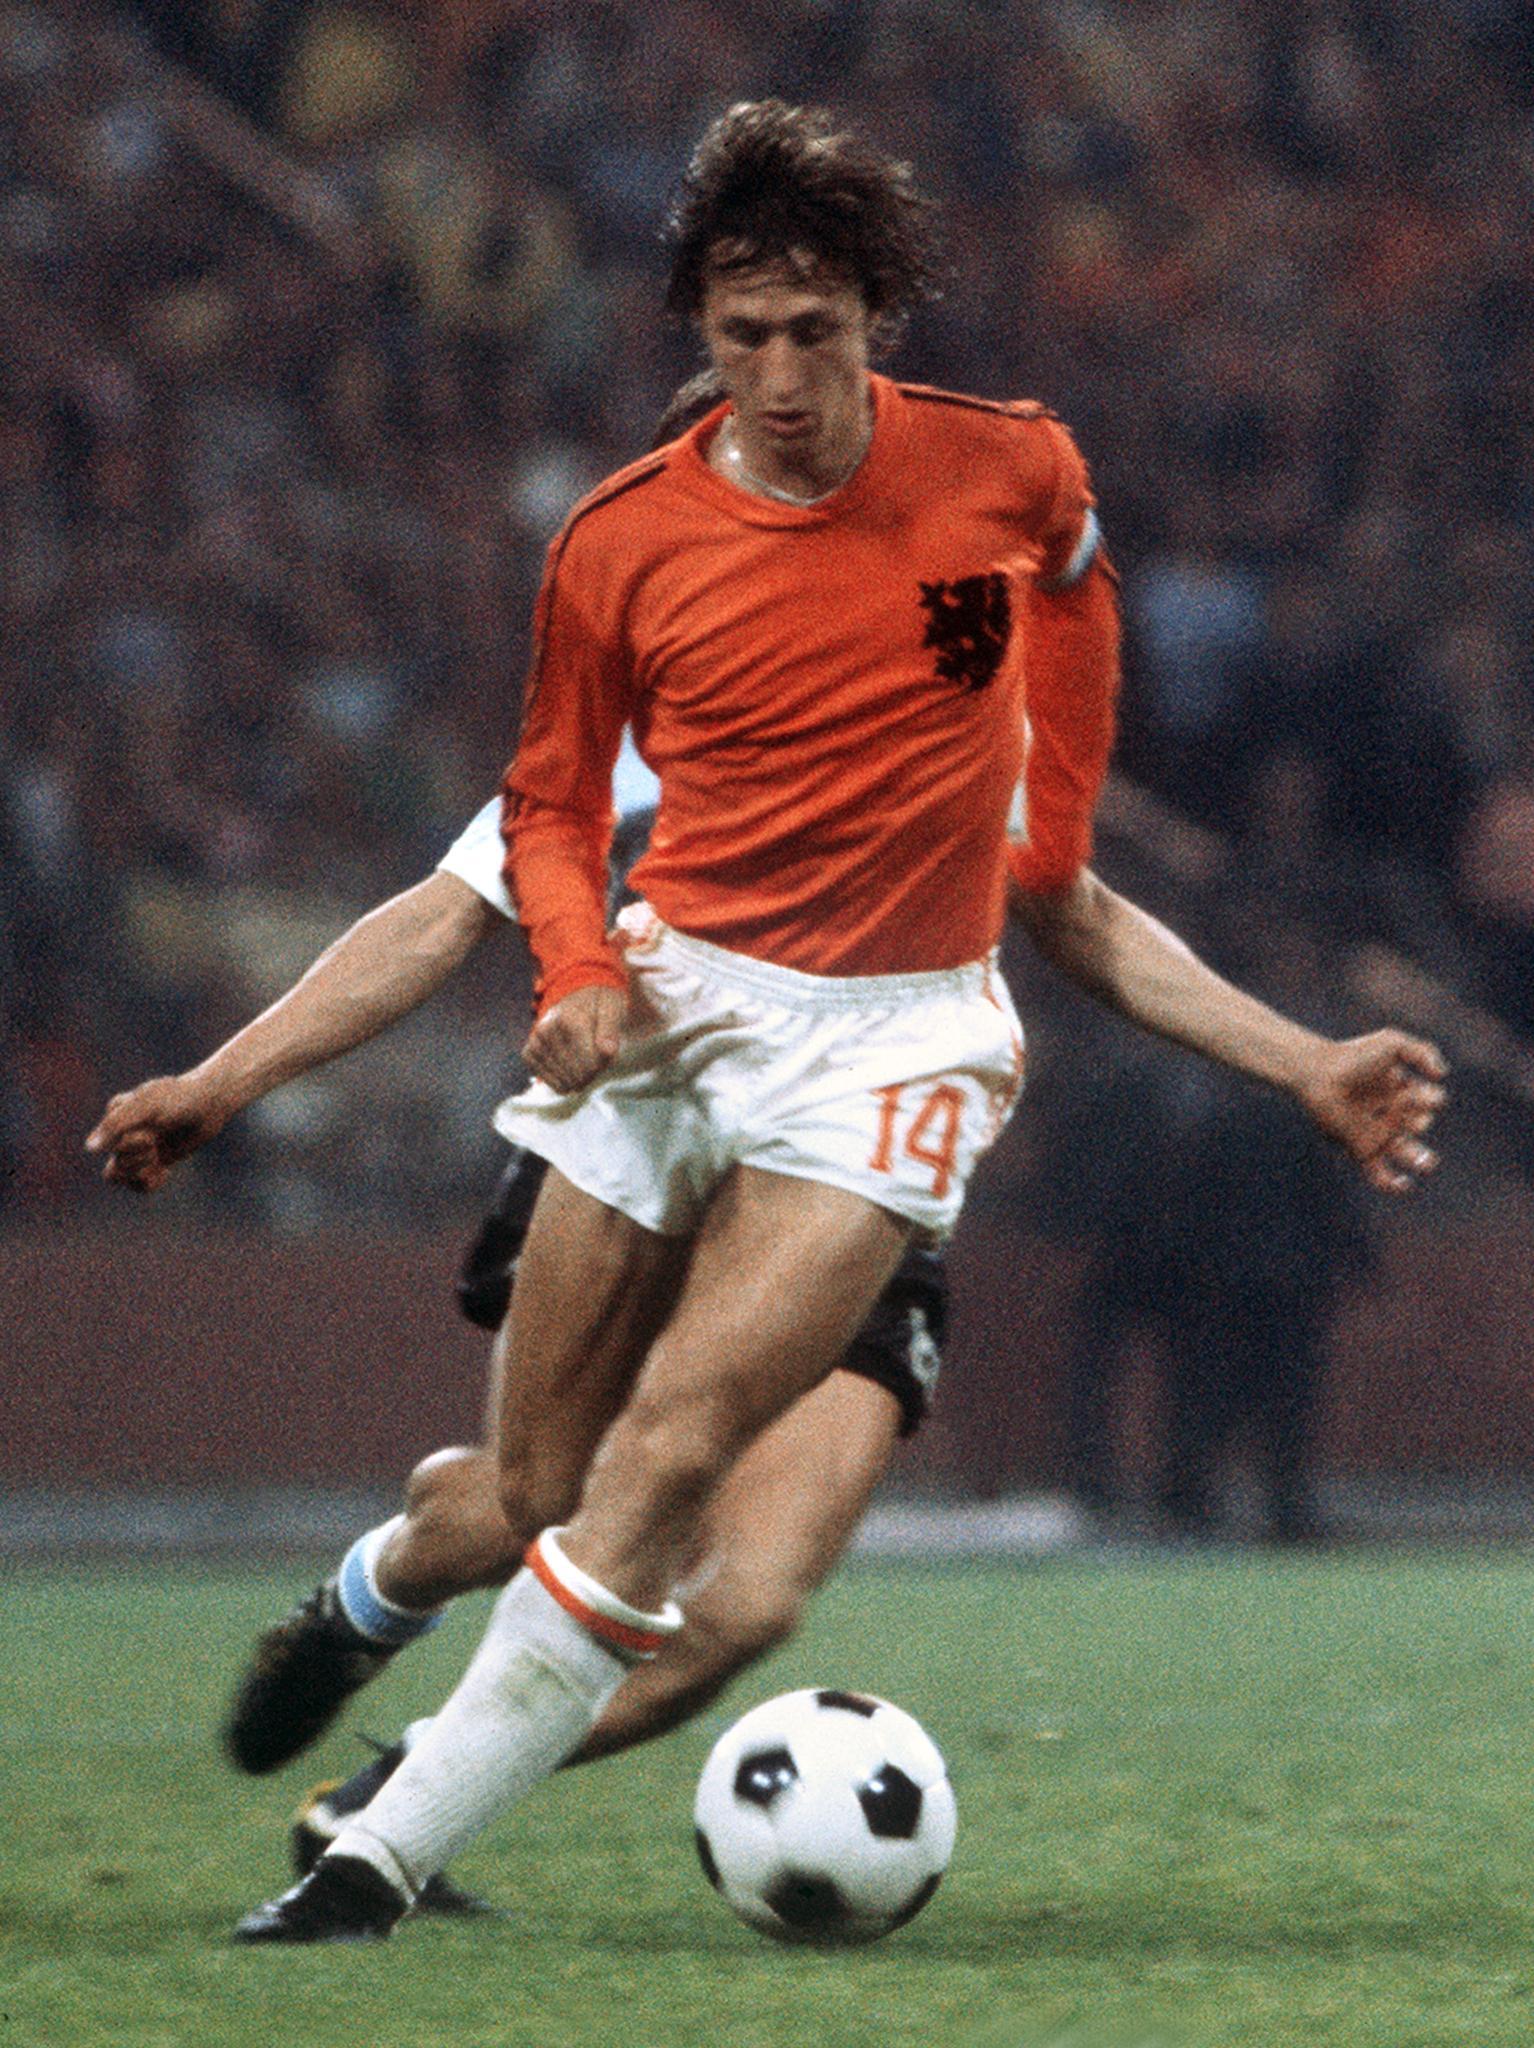 Johan Cruyff: The Dutch maestro who changed the game with Total